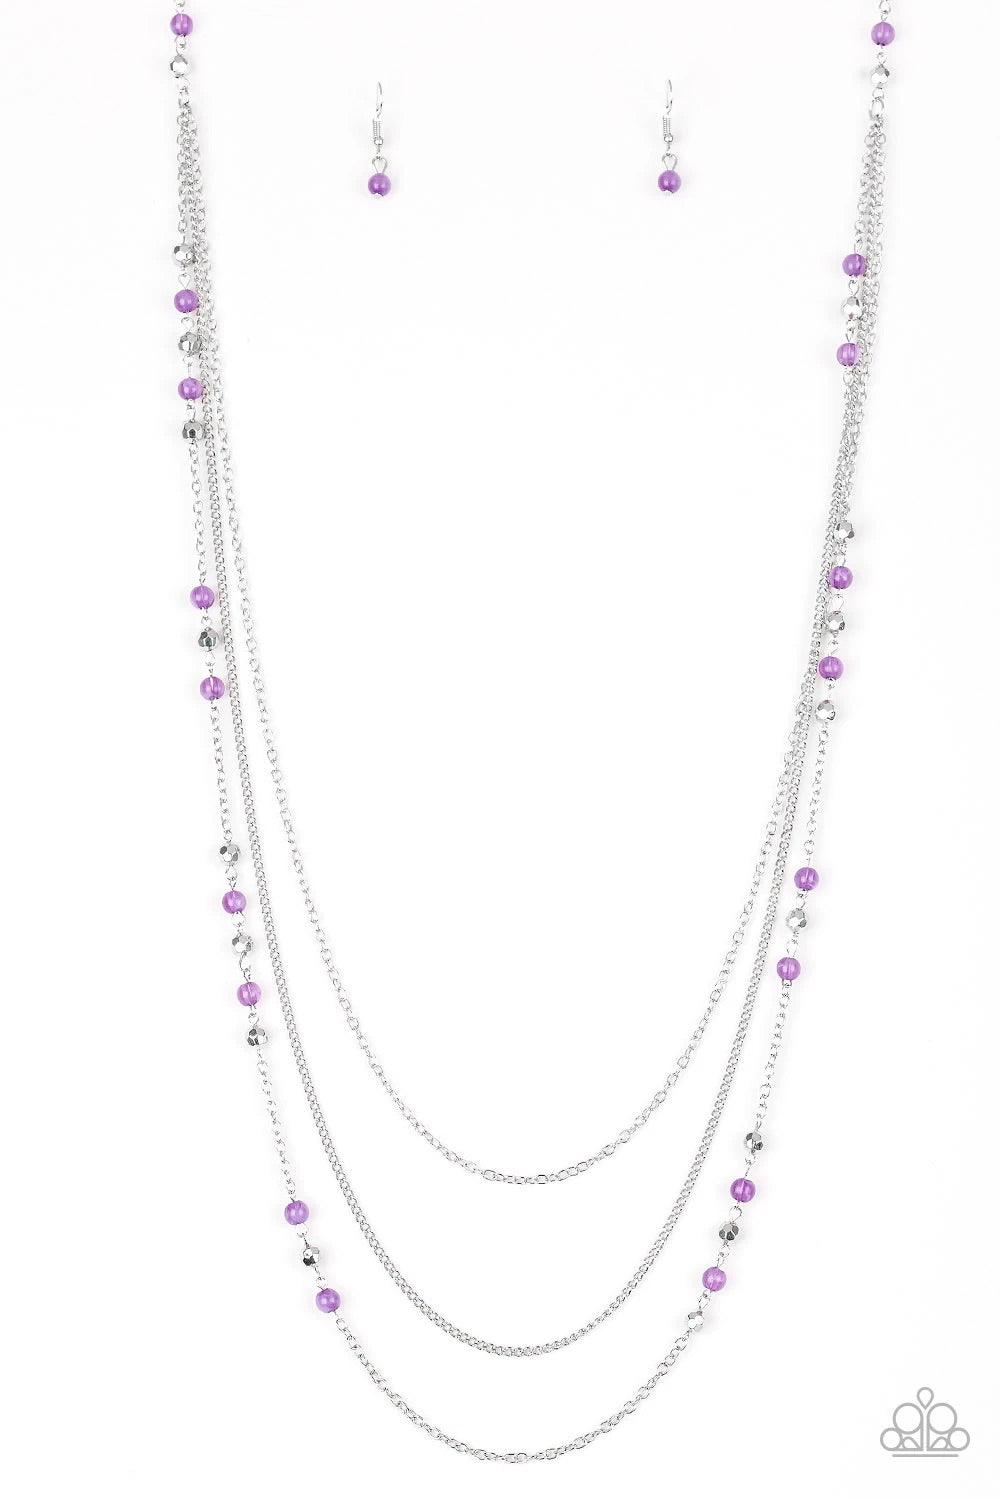 Paparazzi Accessories Colorful Cadence - Purple Faceted silver and glassy purple beads trickle along shimmery silver chains down the chest for a whimsical look. Features an adjustable clasp closure. Sold as one individual necklace. Includes one pair of ma